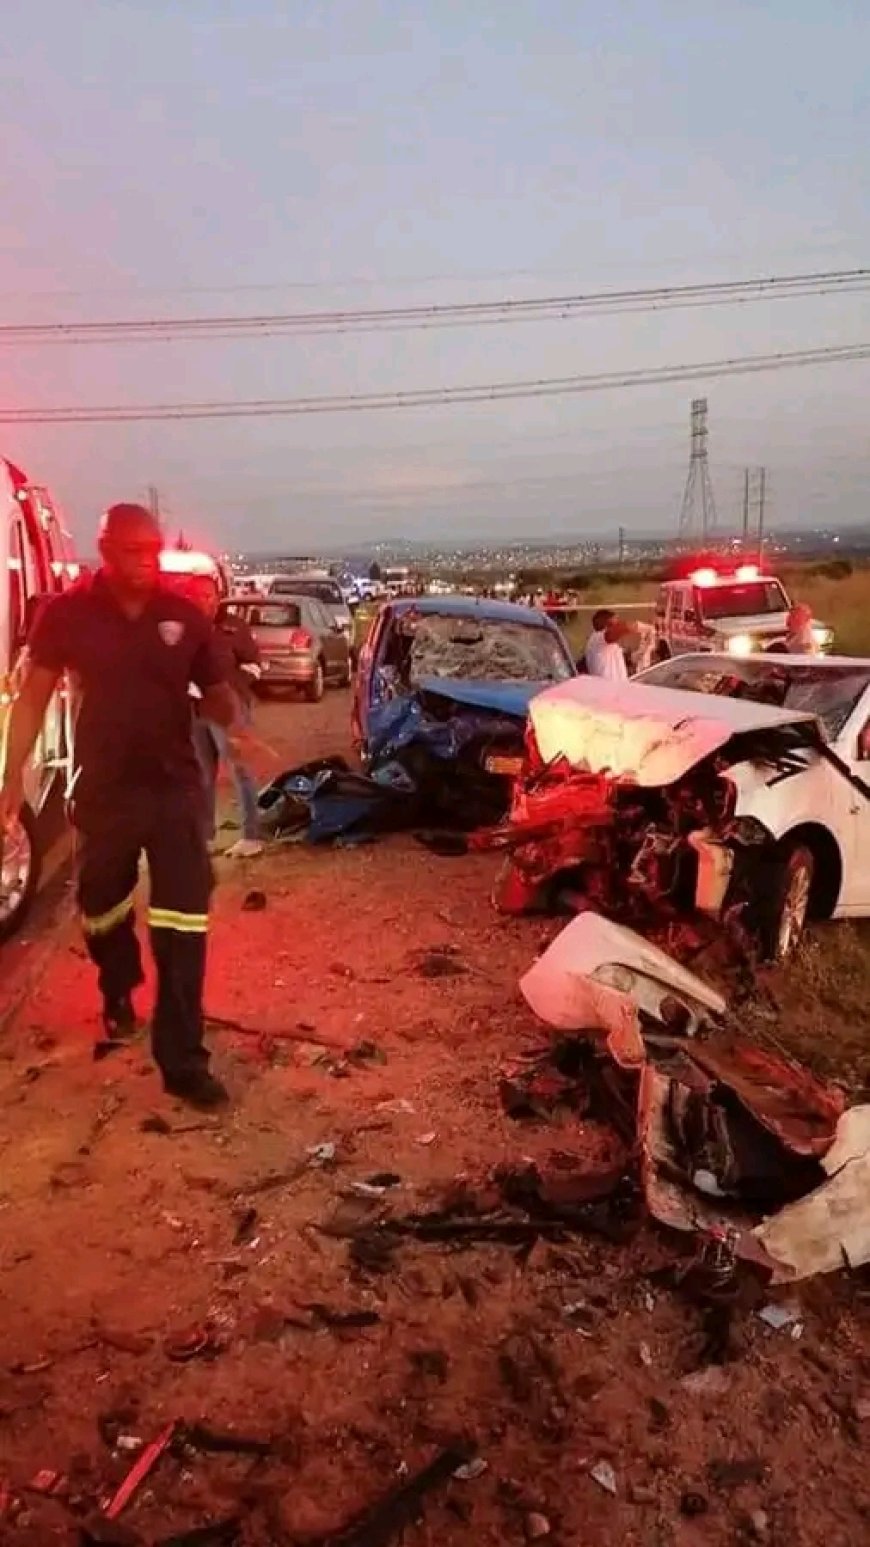 A number of passengers died after the vehicles collided